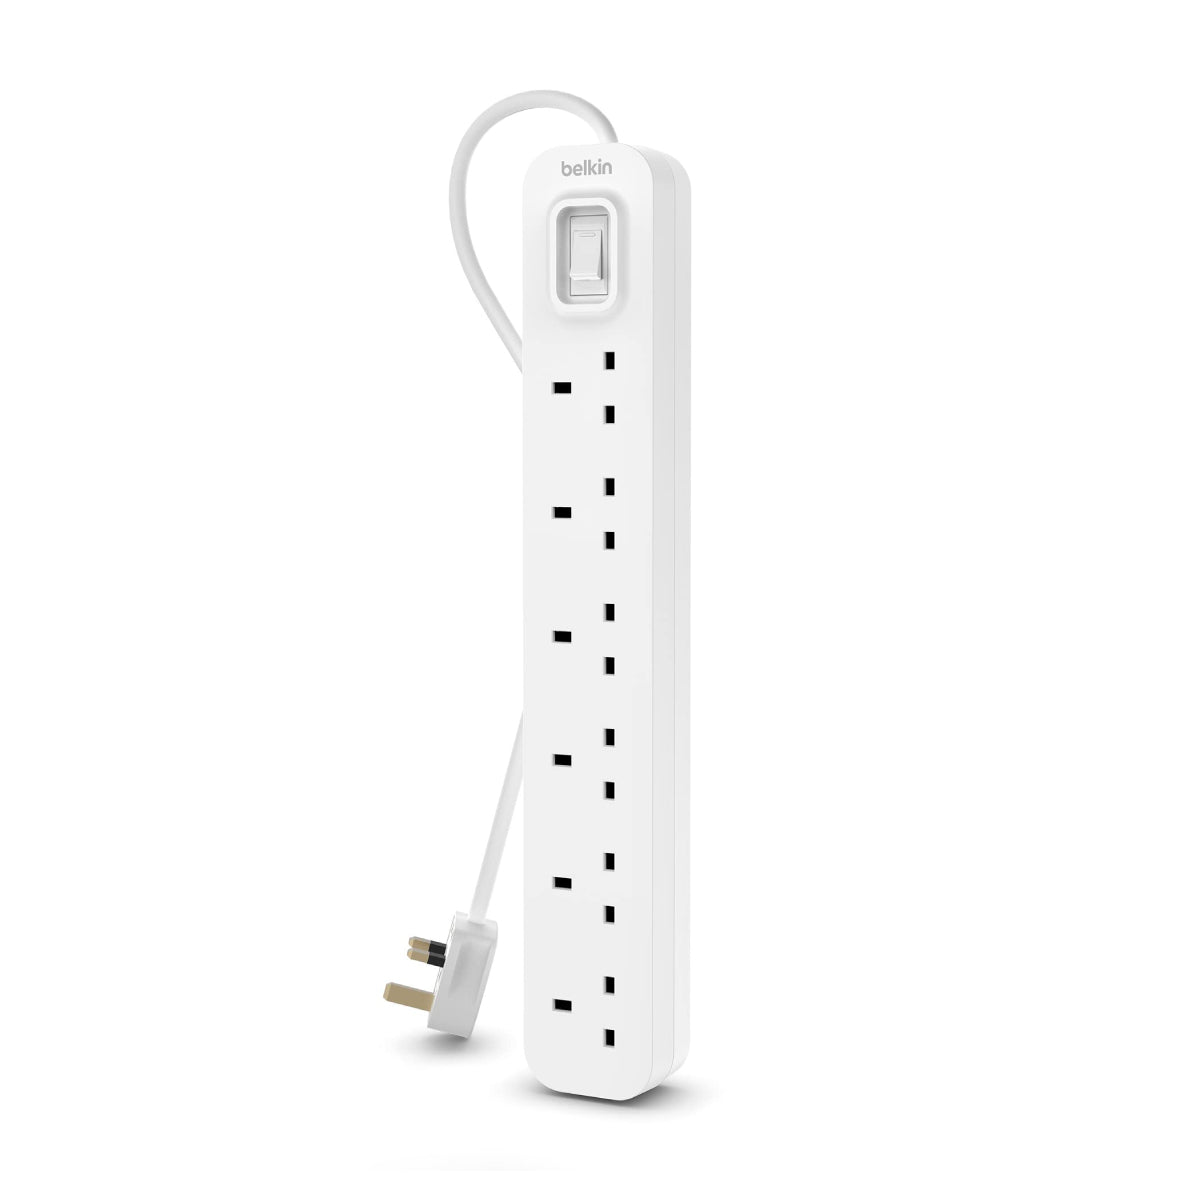 Belkin 6 Socket Power Extension With 3M Cable UK Plug - White - كابل - Store 974 | ستور ٩٧٤